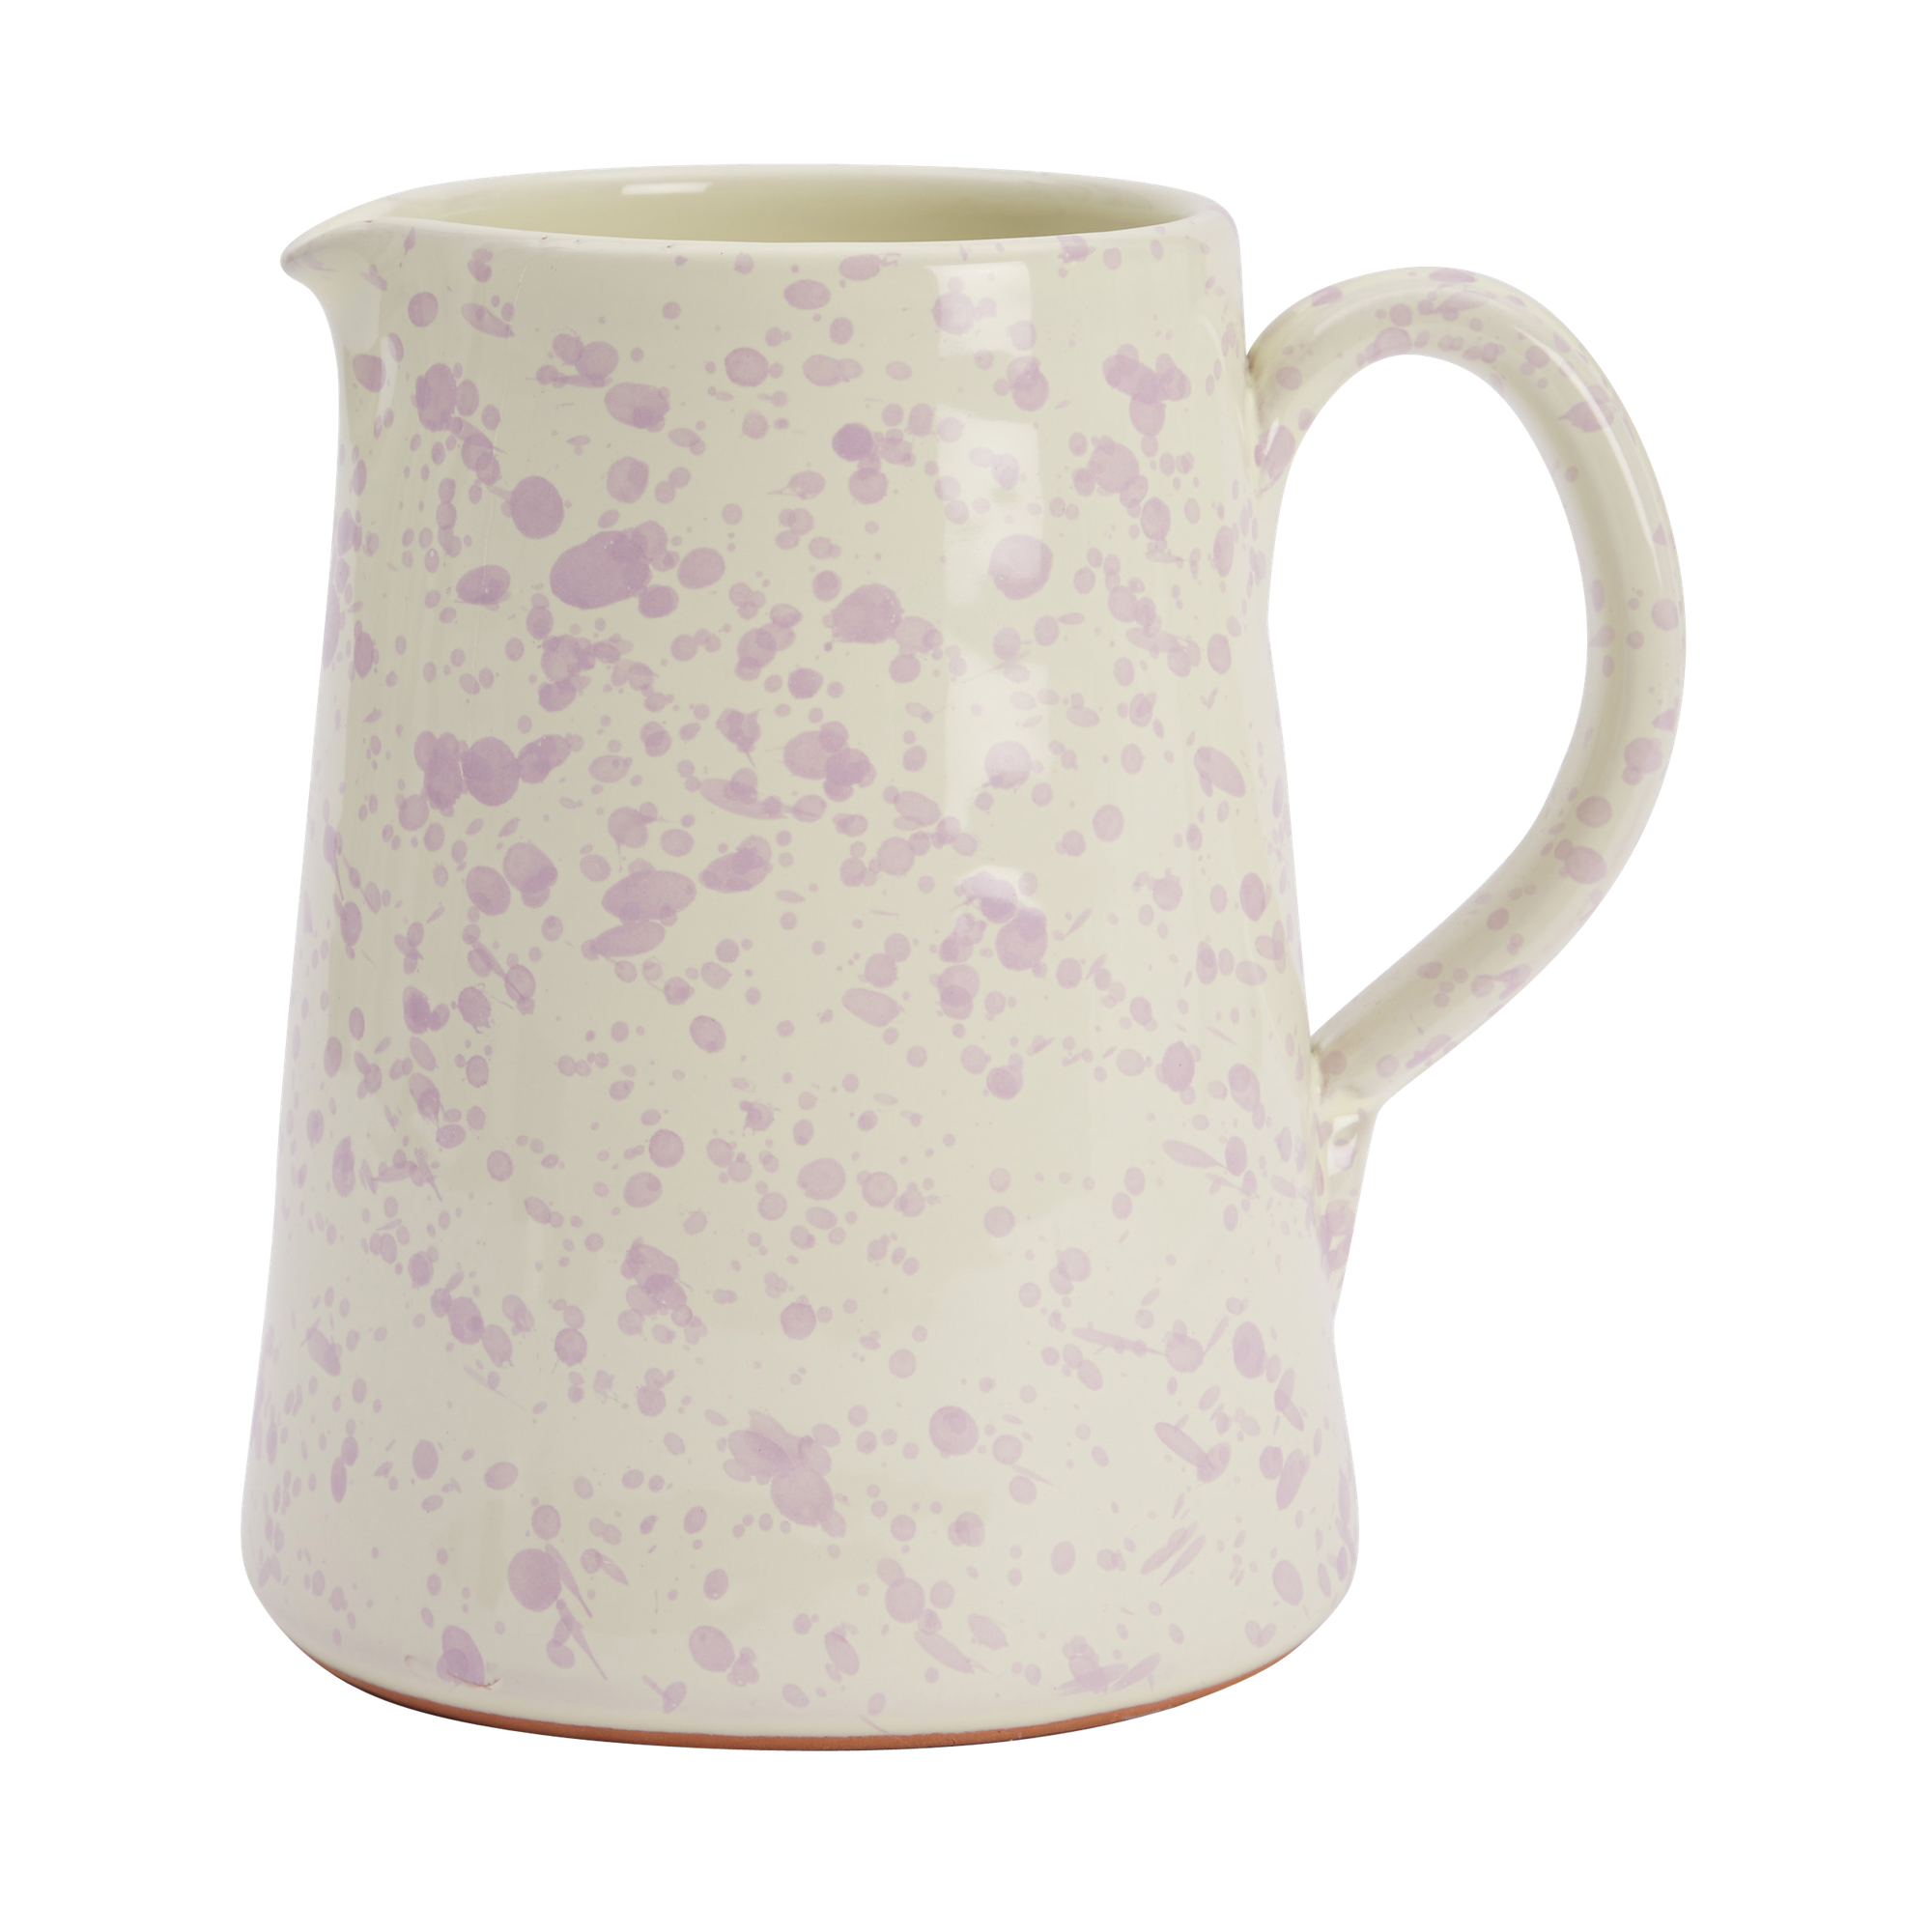 Hot pottery jug in lilac